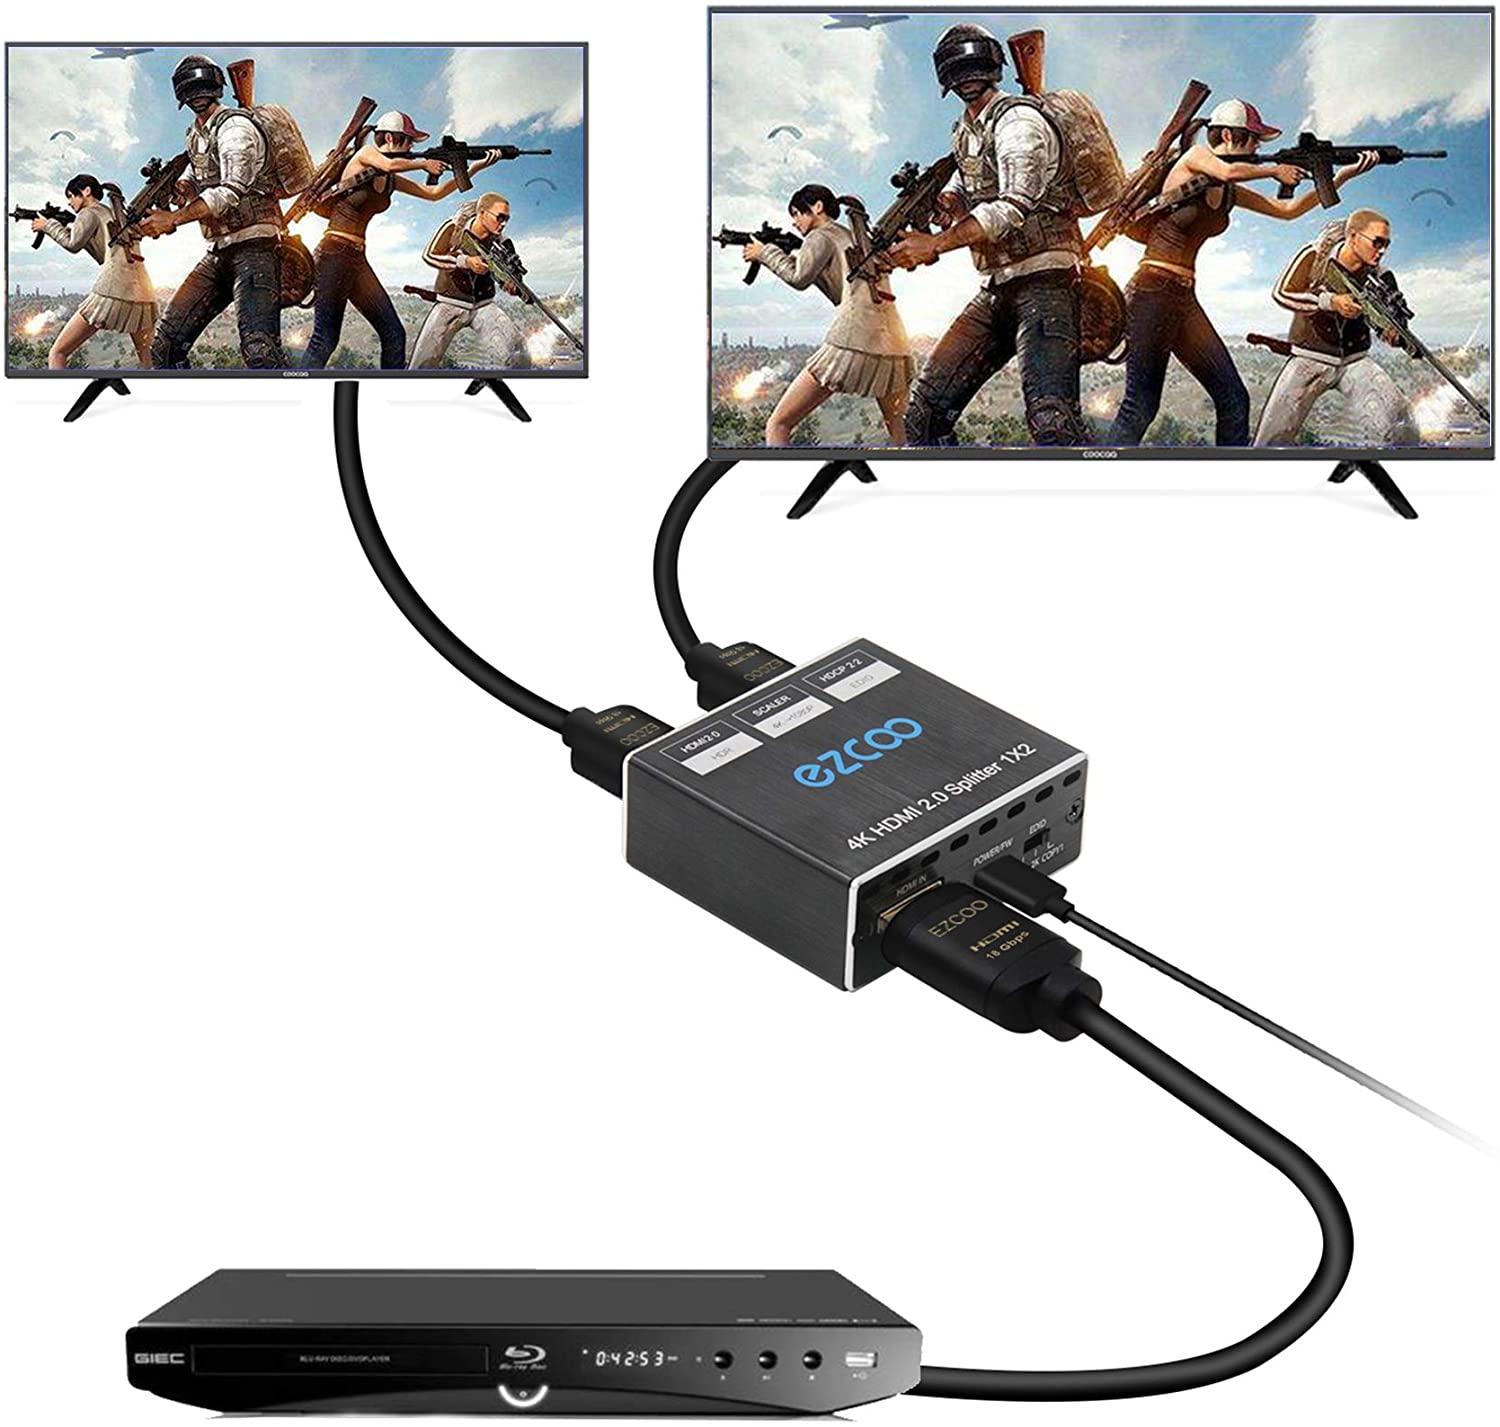 Scaler 4K 1080P HDMI Splitter 1 in2 out 4K 60Hz 4:4:4 HDR Dolby Vision Dolby Atmos Scaler EDID Switch,USB Power Firmware Upgrade HDCP2.2